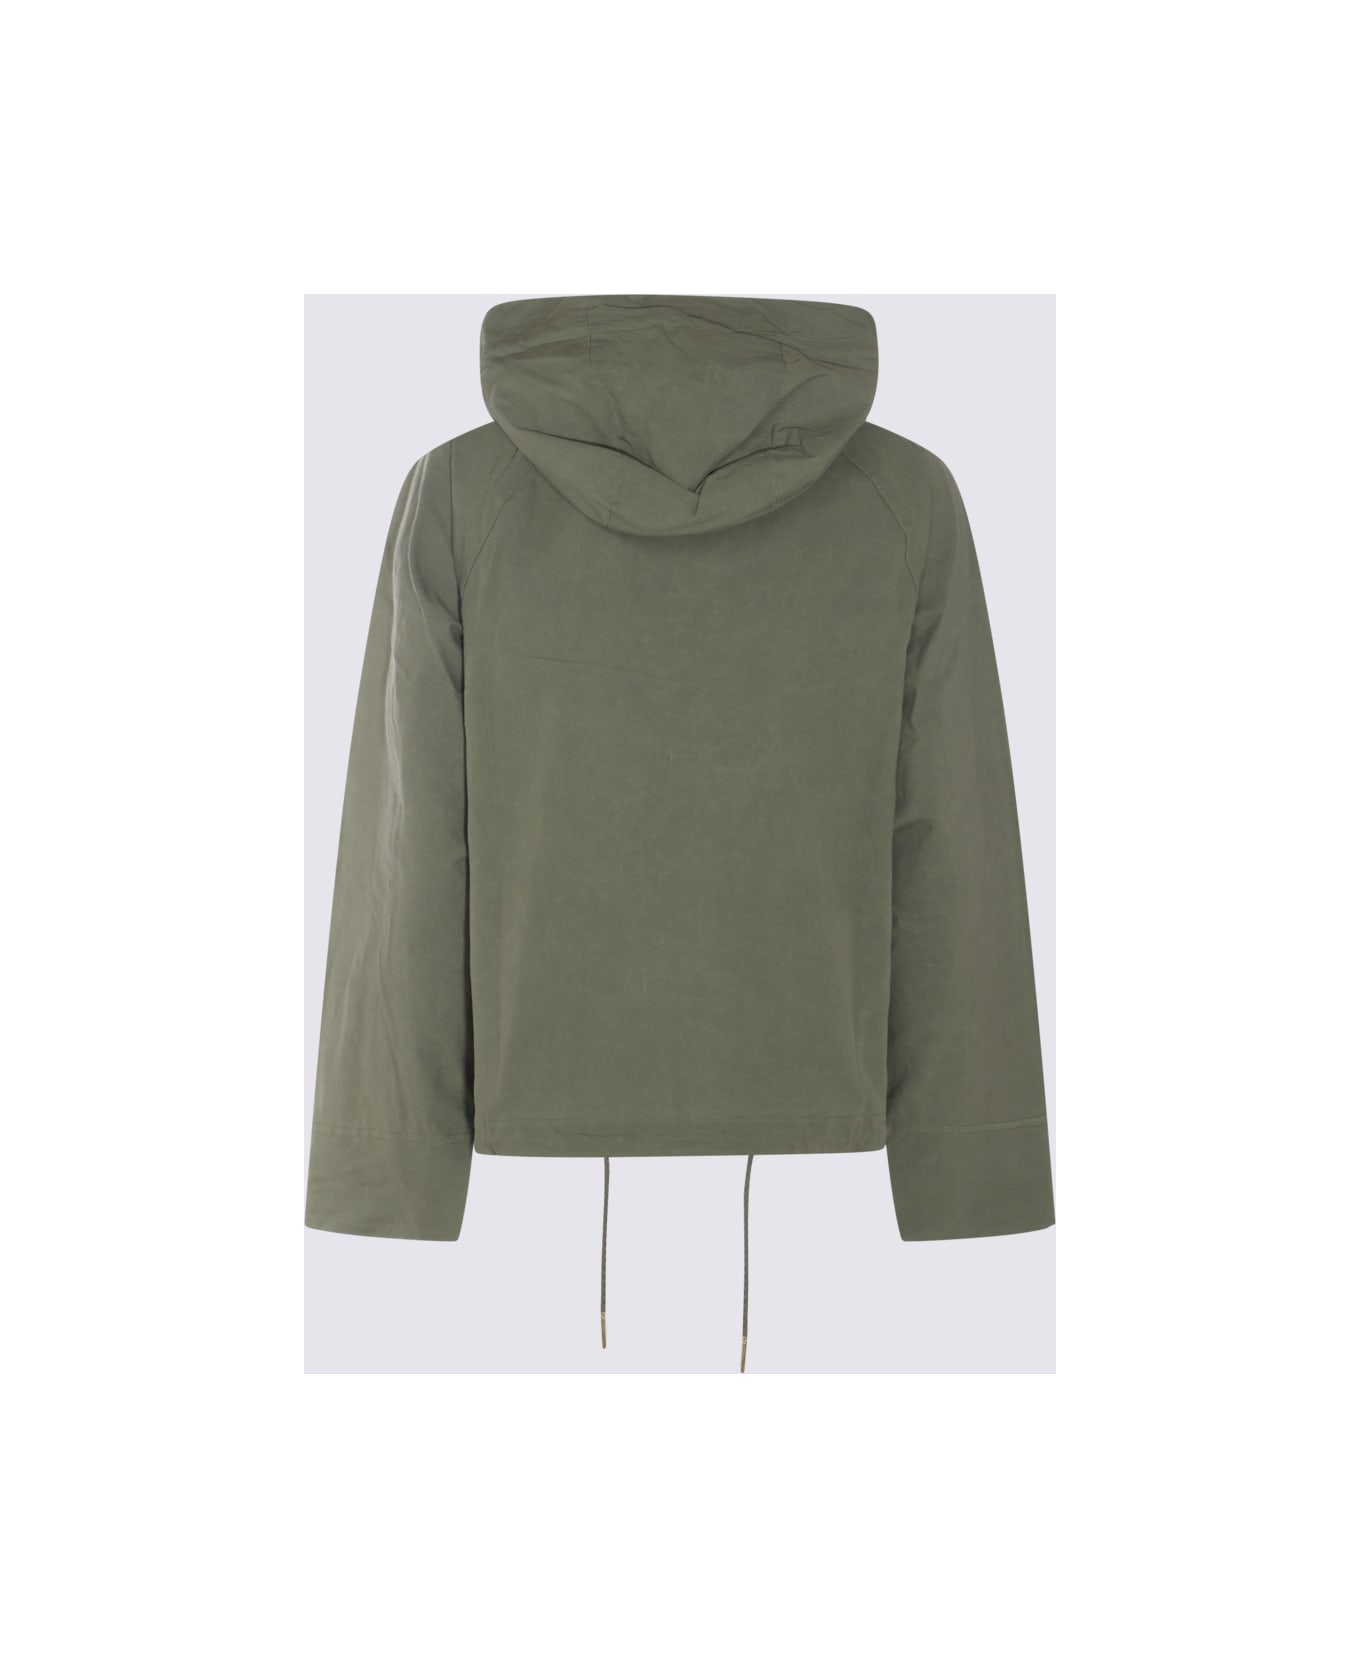 Barbour Army Cotton Casual Jacket - ARMY GREEN ジャケット